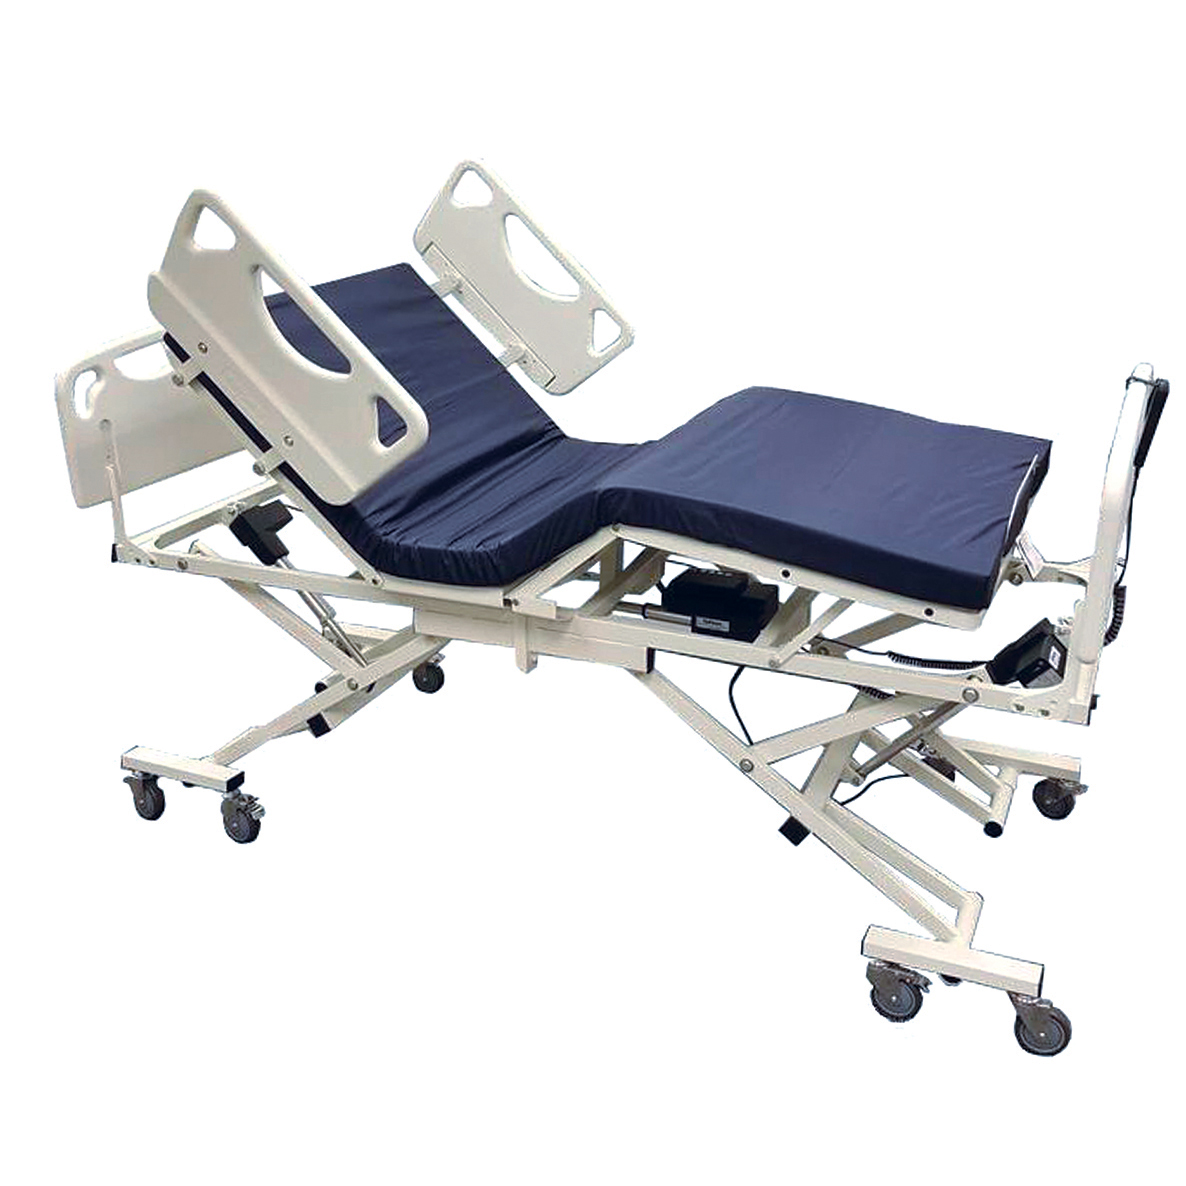 Cypress heavy duty extra wide large bariatric adjustable hospital bed